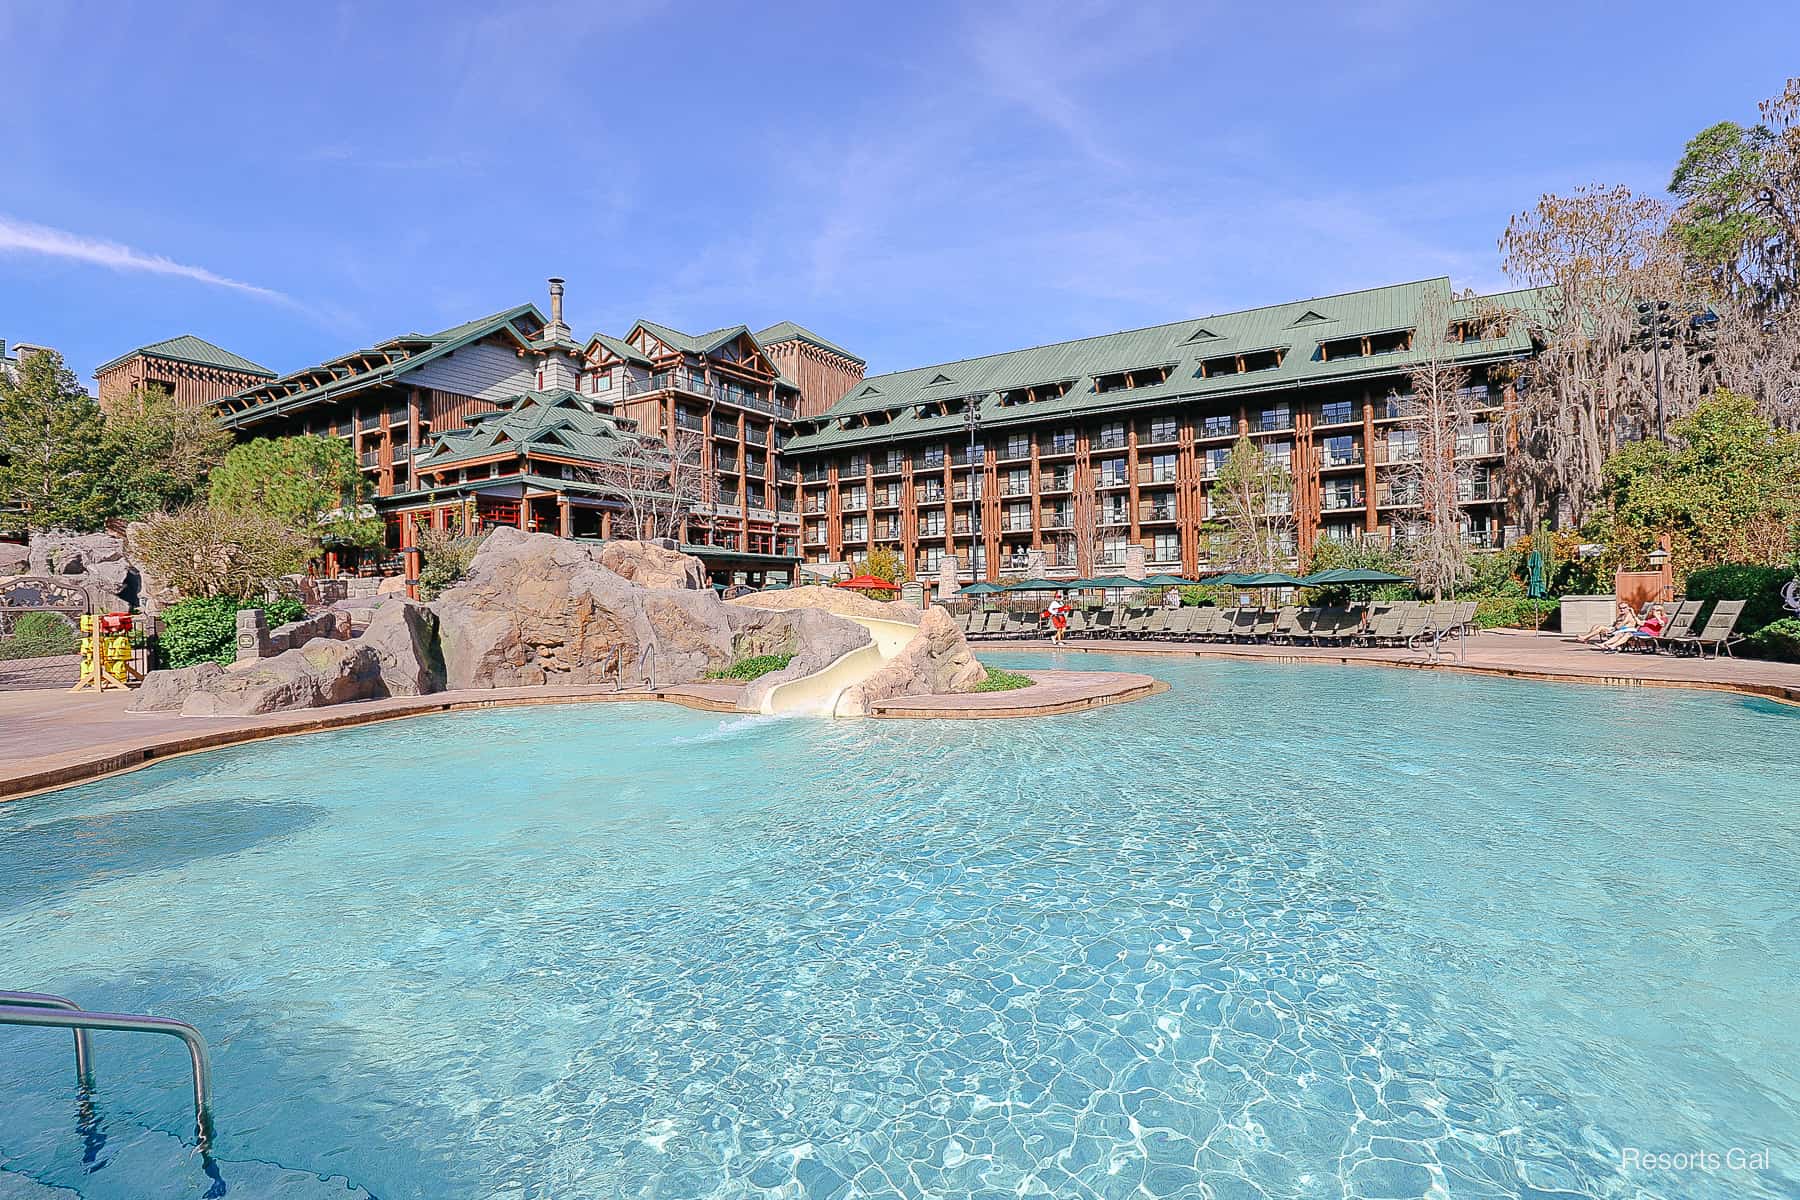 blue water of the pool with the brown Wilderness Lodge in the background 